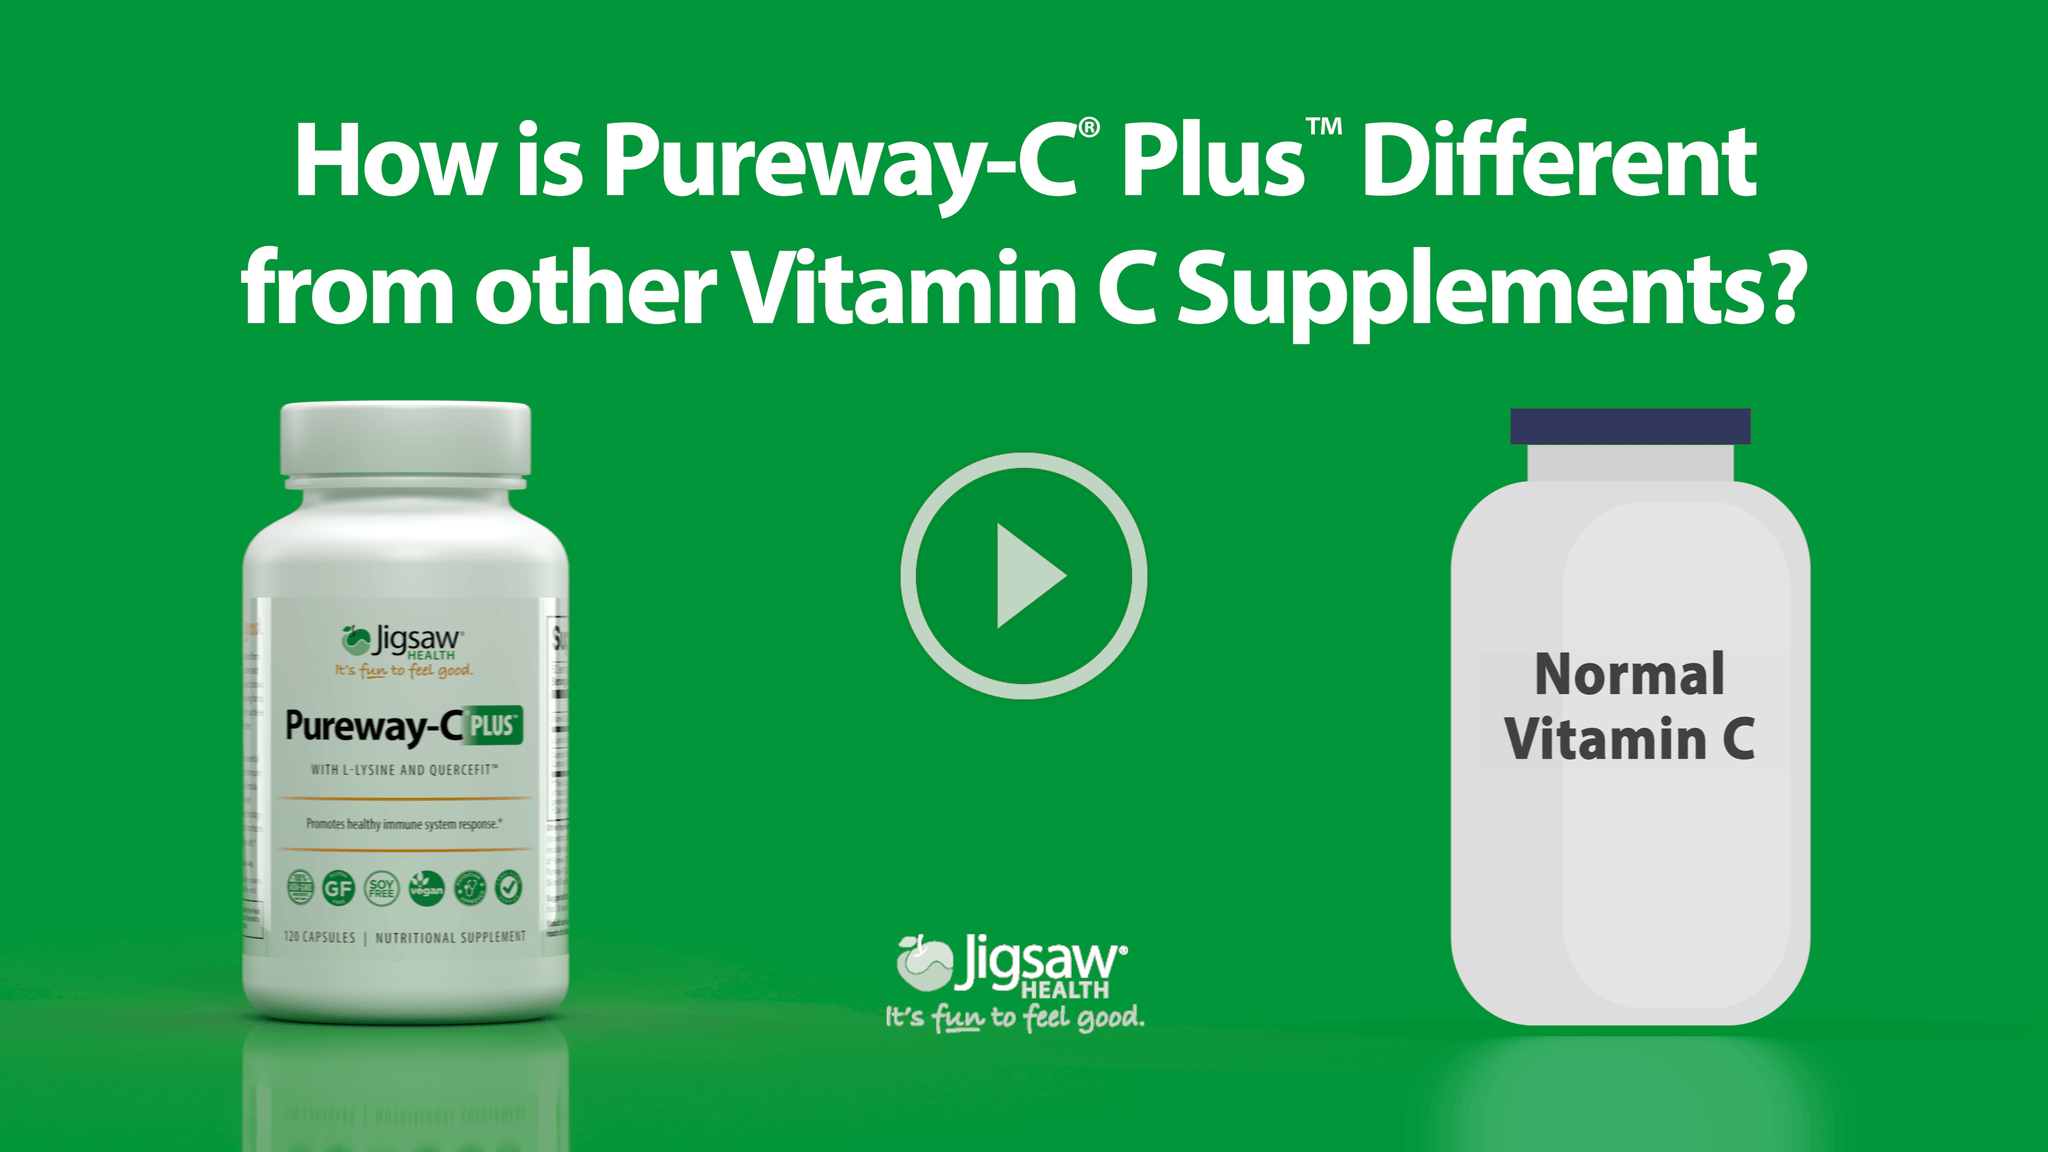 How is Pureway-C Plus different from other Vitamin C Supplements?